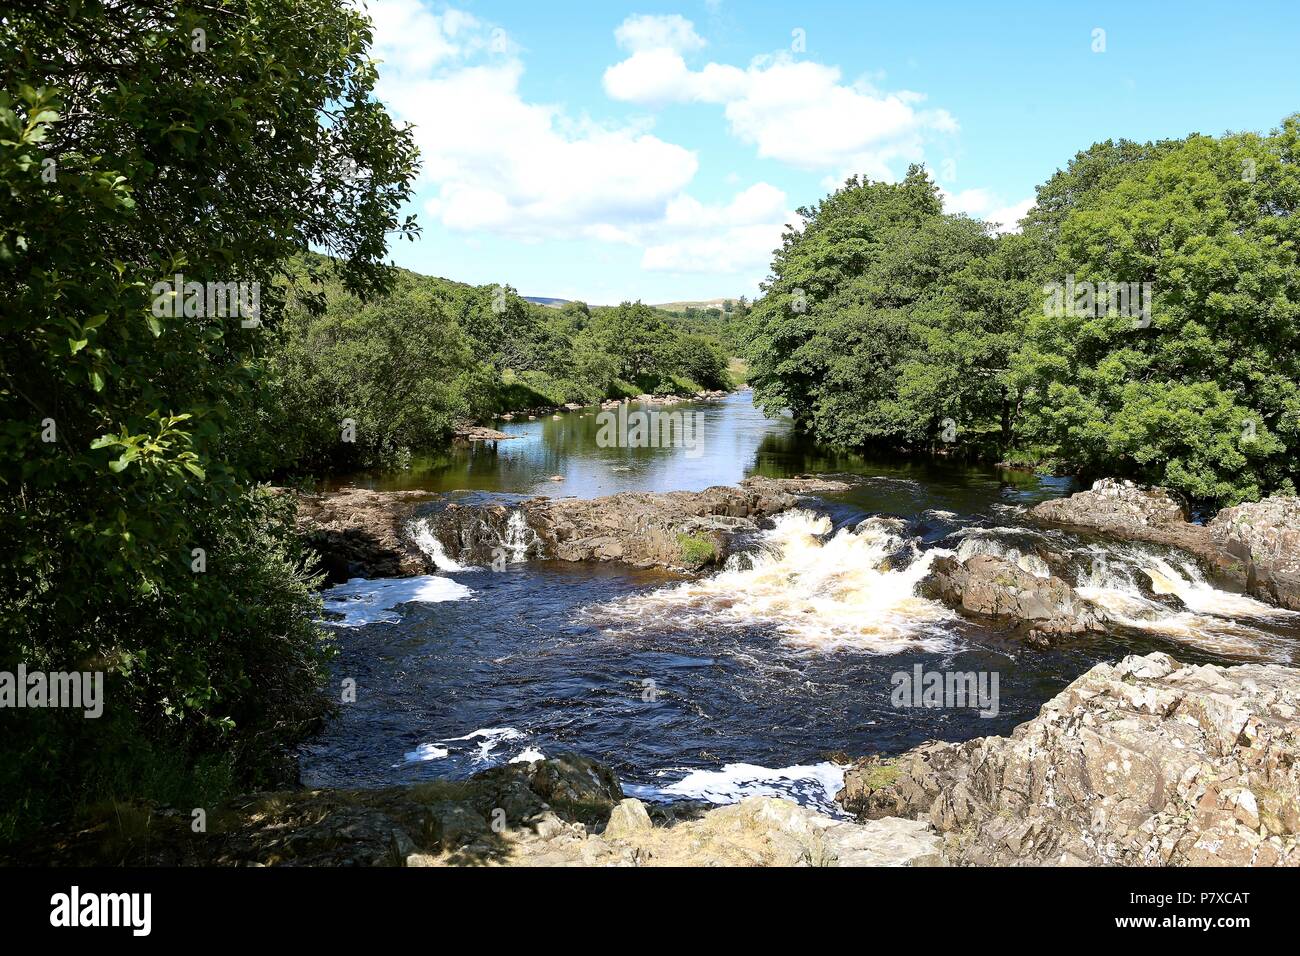 PENNINES IN COUNTY DURHAM Stock Photo